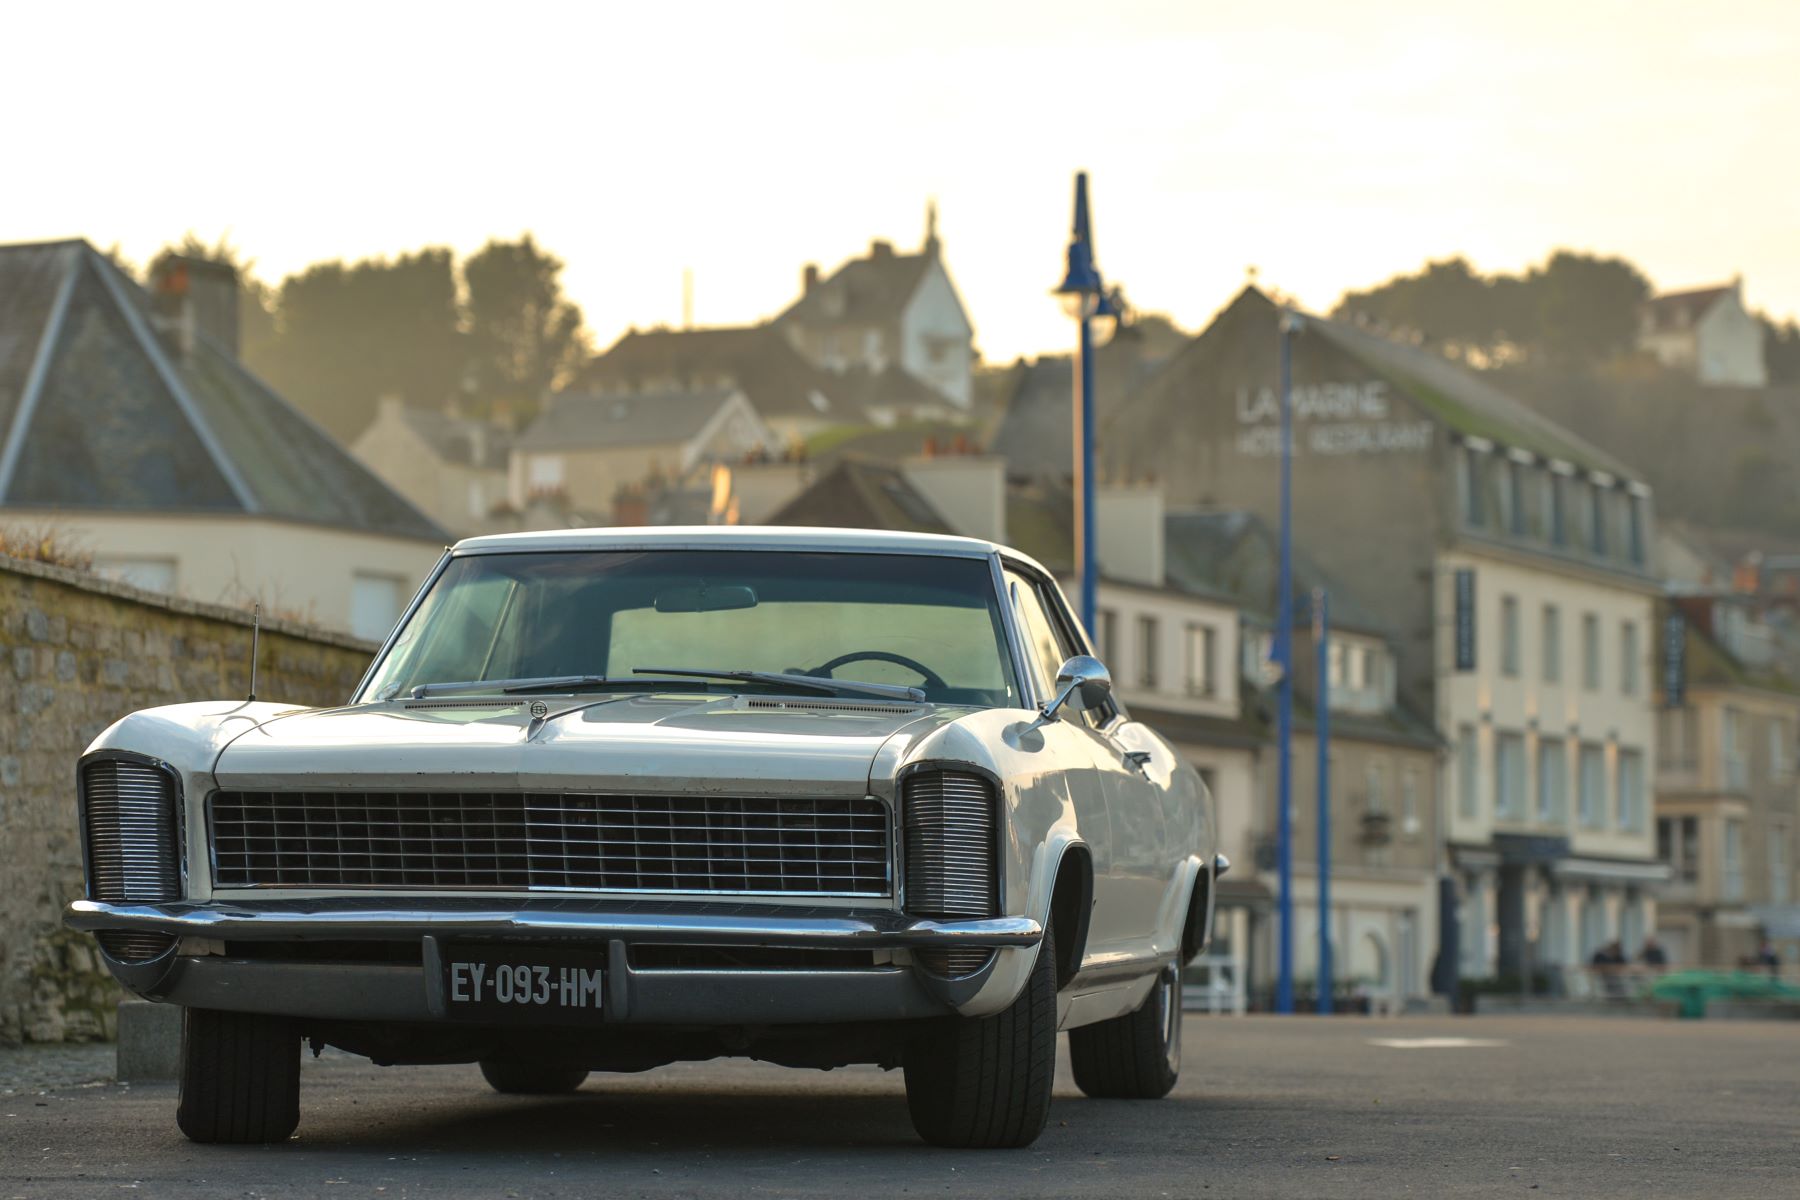 A Buick Riviera model parked at Port-en-Bessin-Huppain in Normandy, France